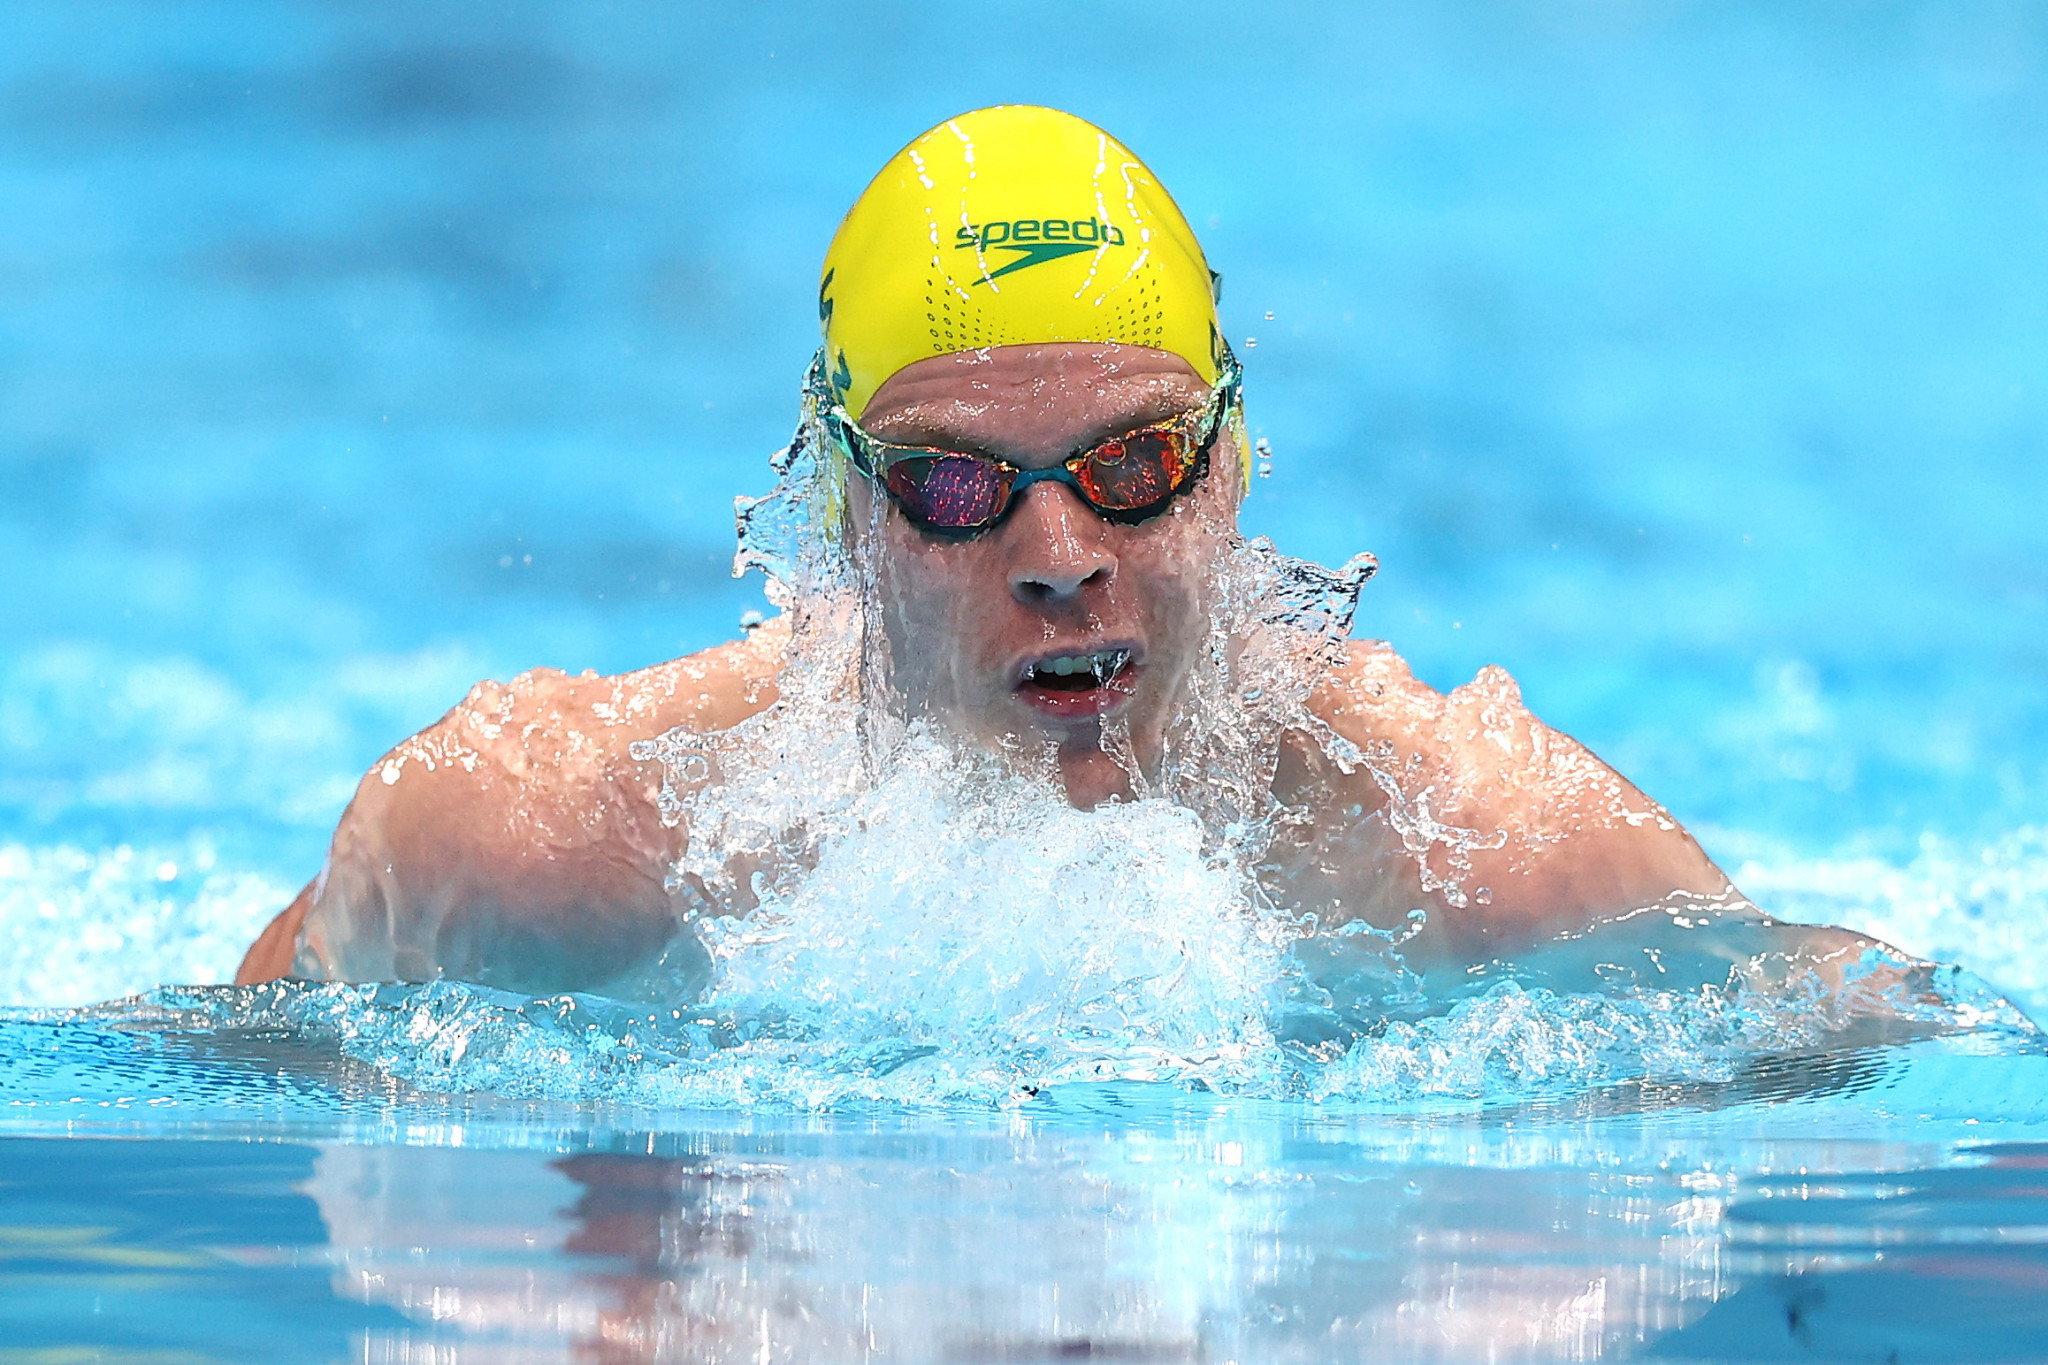 Australia's two-time Commonwealth Games gold medallist Tim Disken is out of Birmingham 2022 due to 